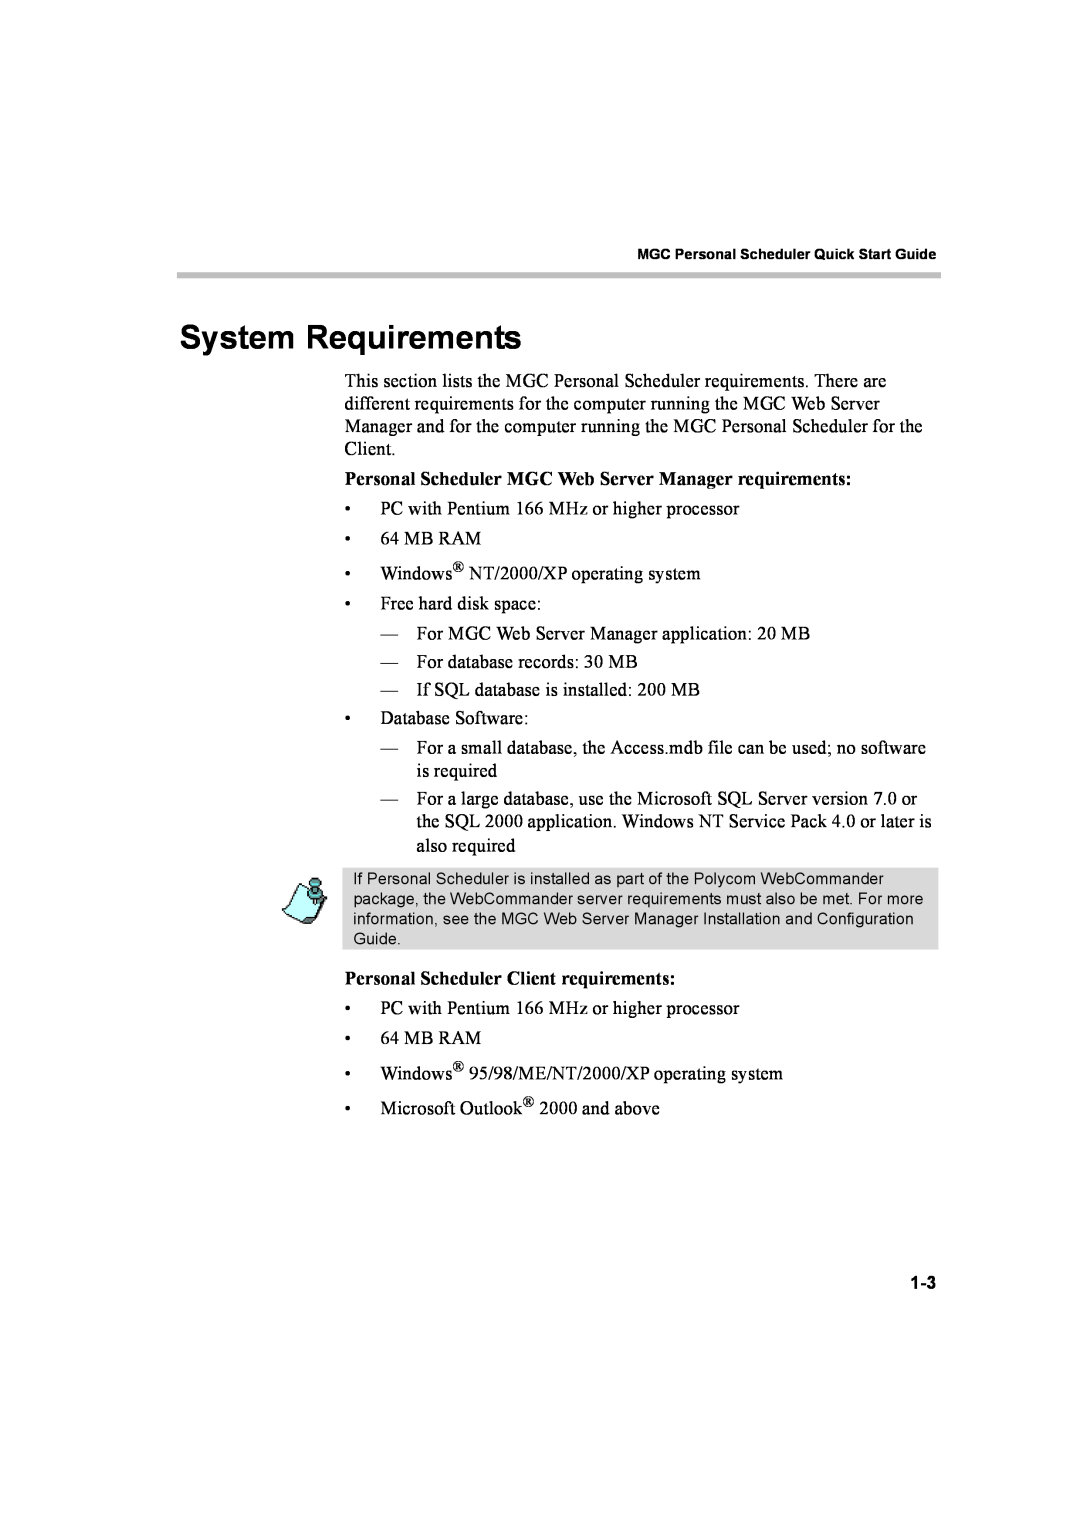 Polycom 8 quick start System Requirements, Personal Scheduler Client requirements 